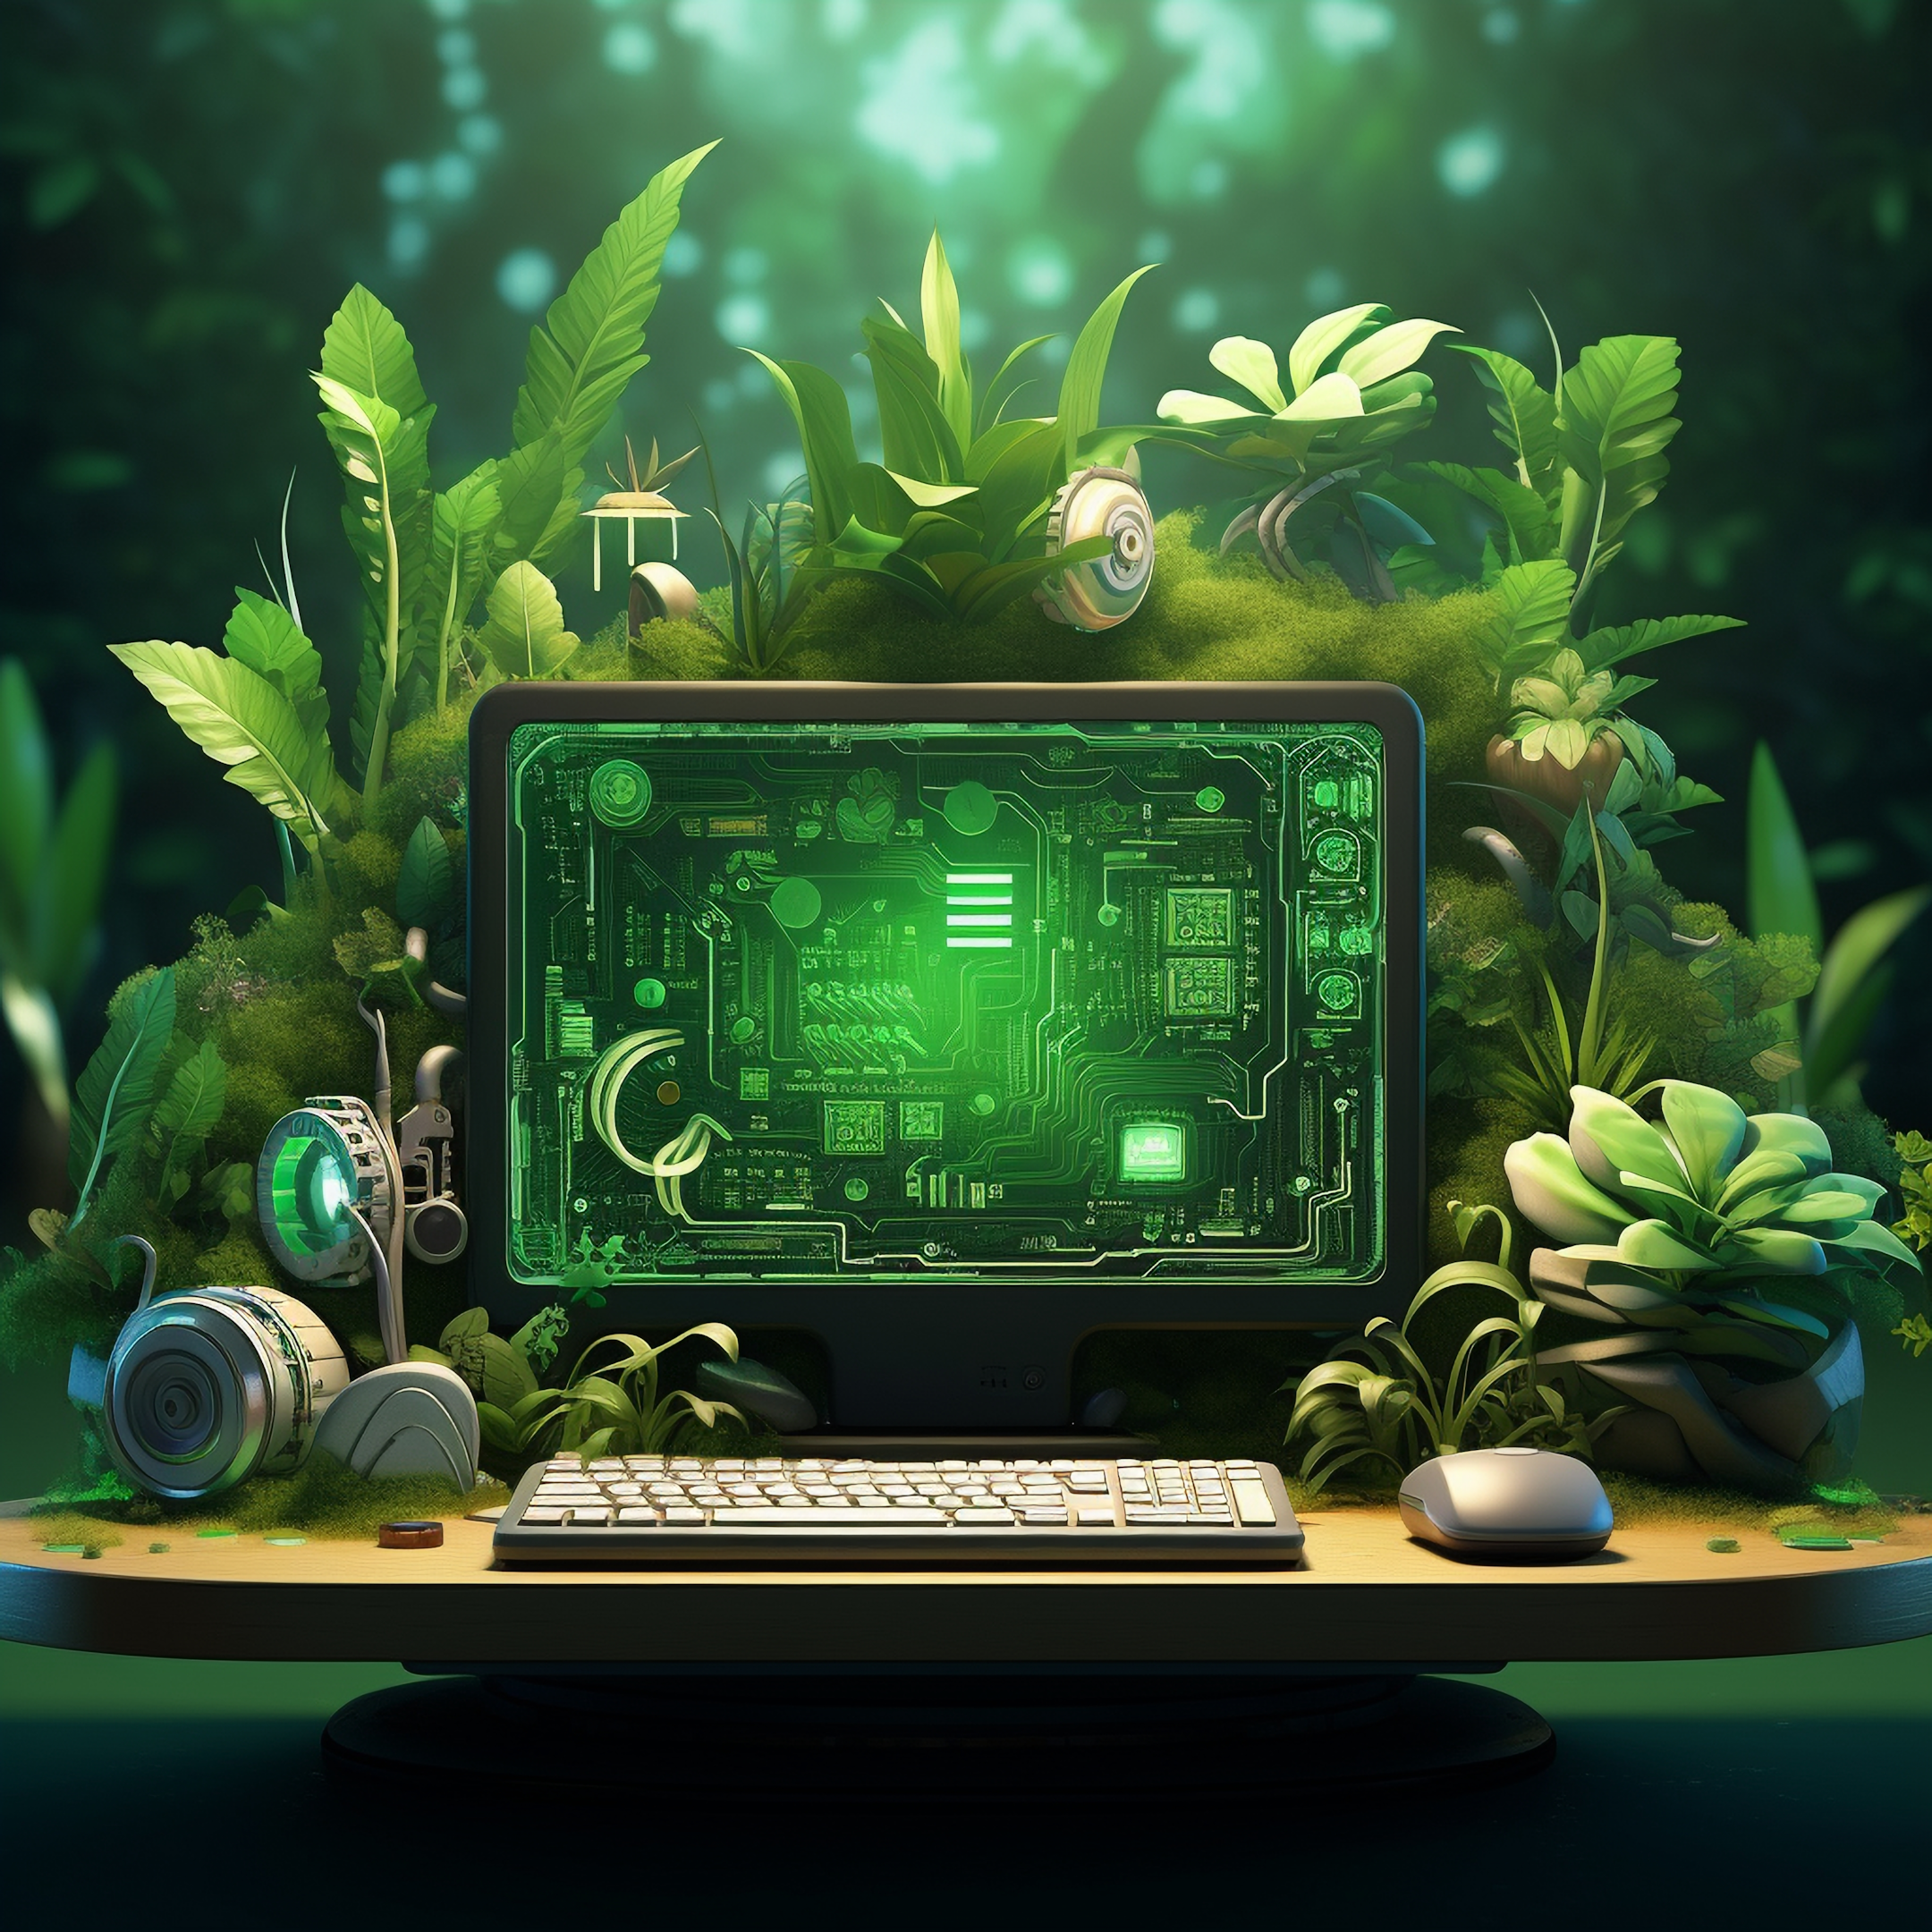 Image depicting a computer enveloped by lush green plants, illustrating the concept of green cloud computing.